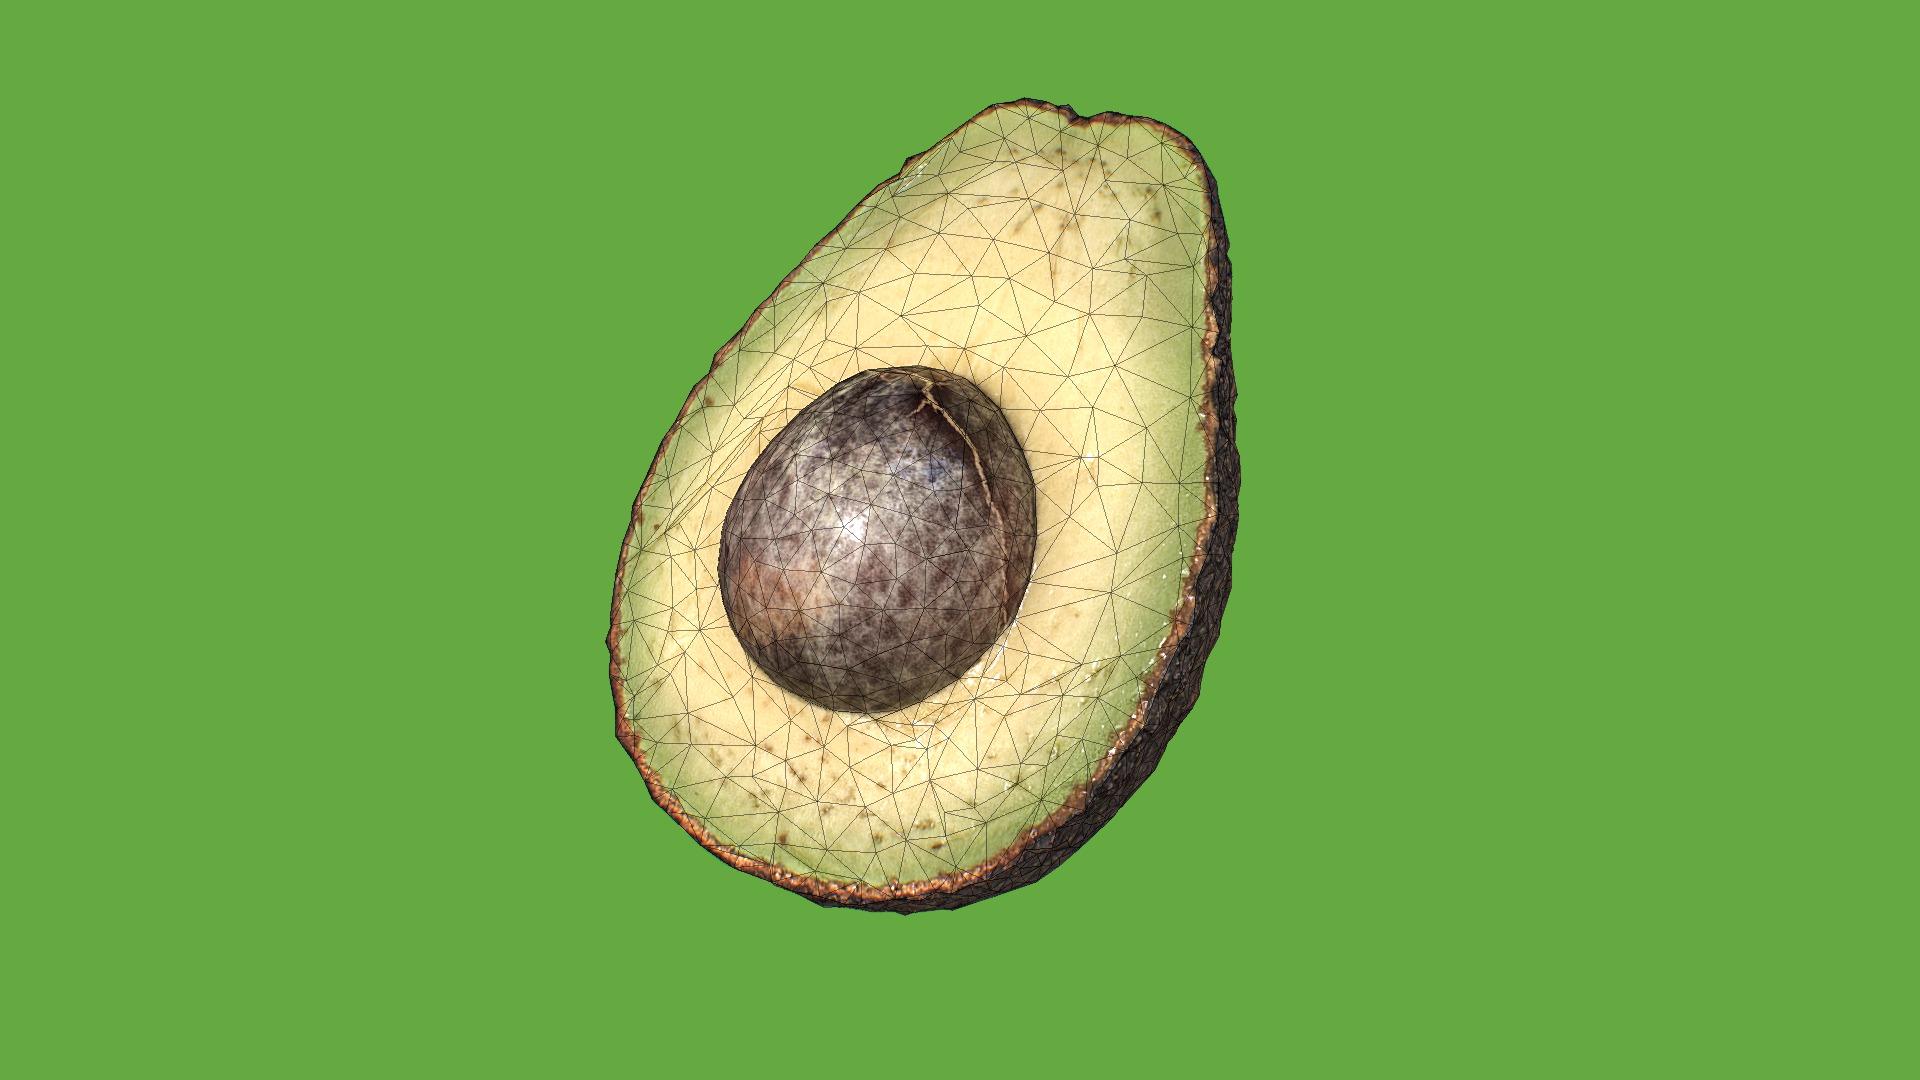 3D model Avocado: Low Poly – Half With Core - This is a 3D model of the Avocado: Low Poly - Half With Core. The 3D model is about a circular object with a hole in it.